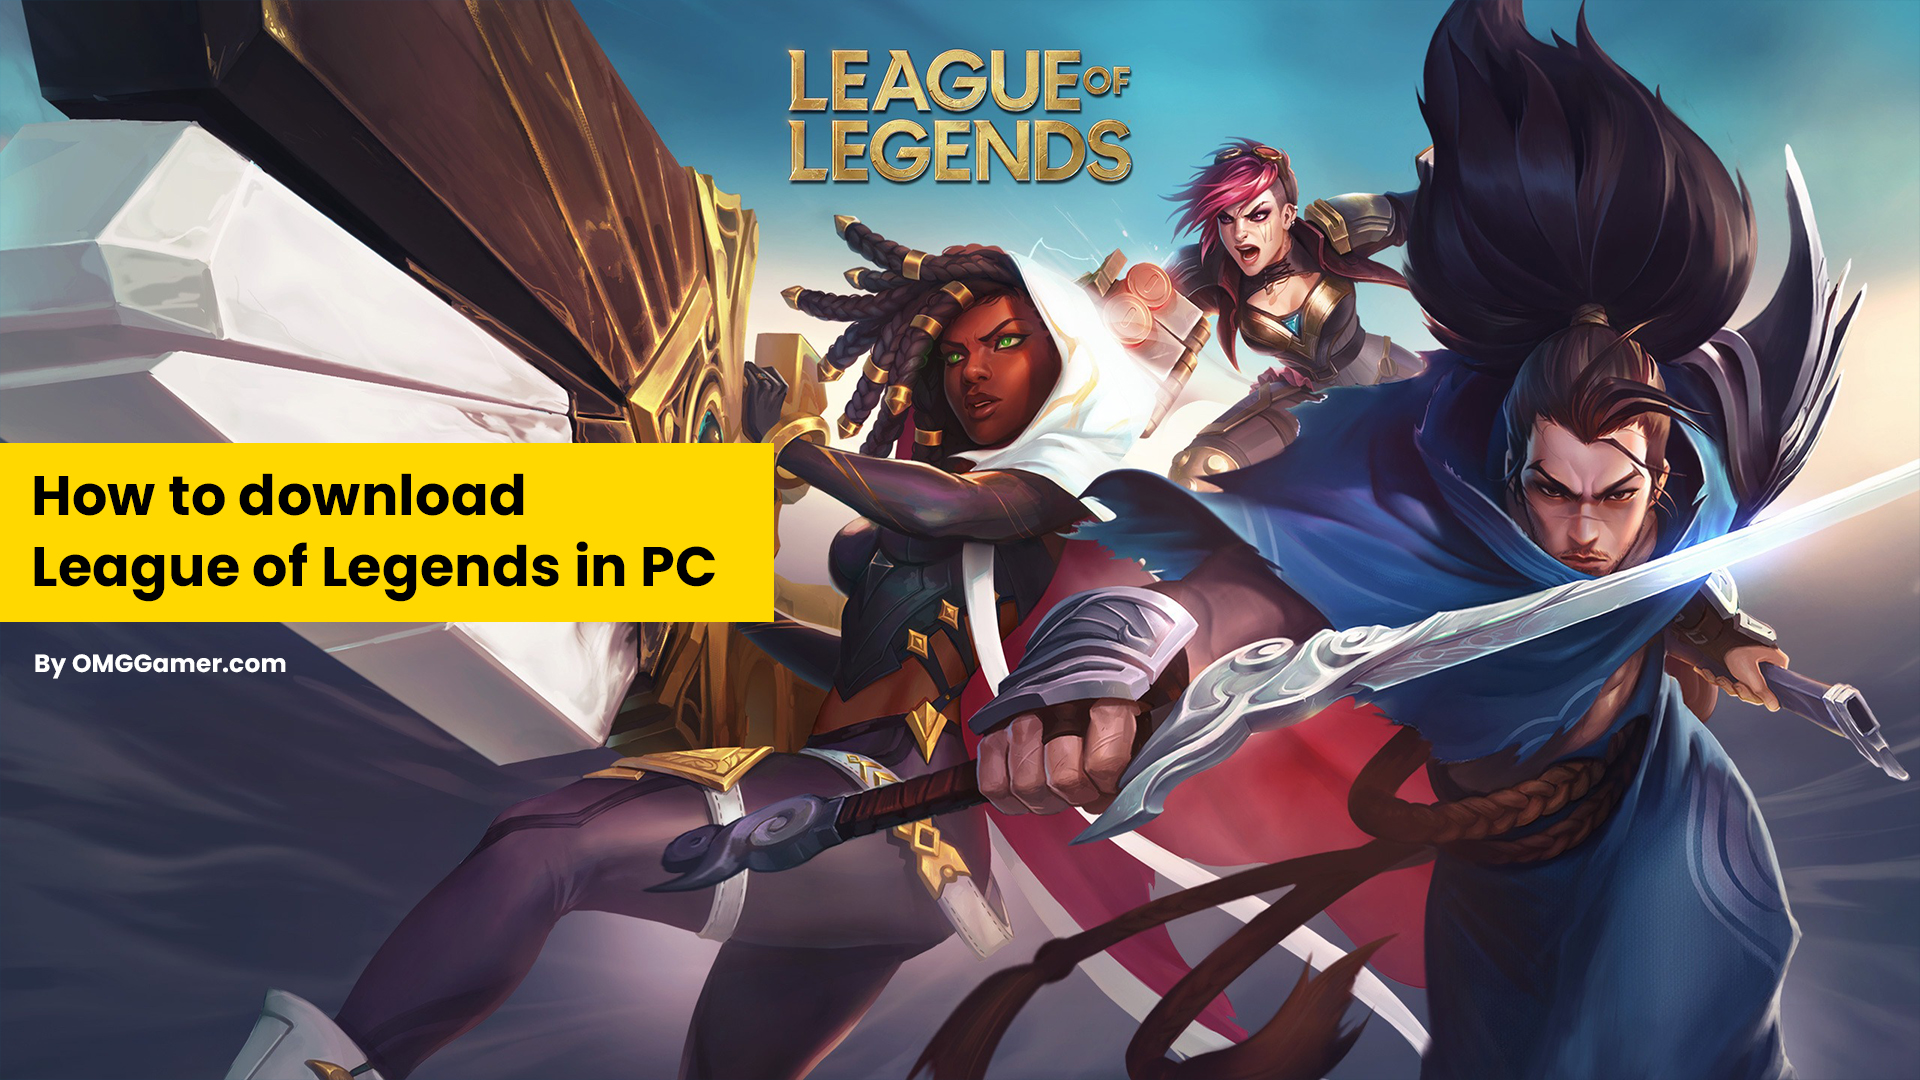 How to download League of Legends in PC